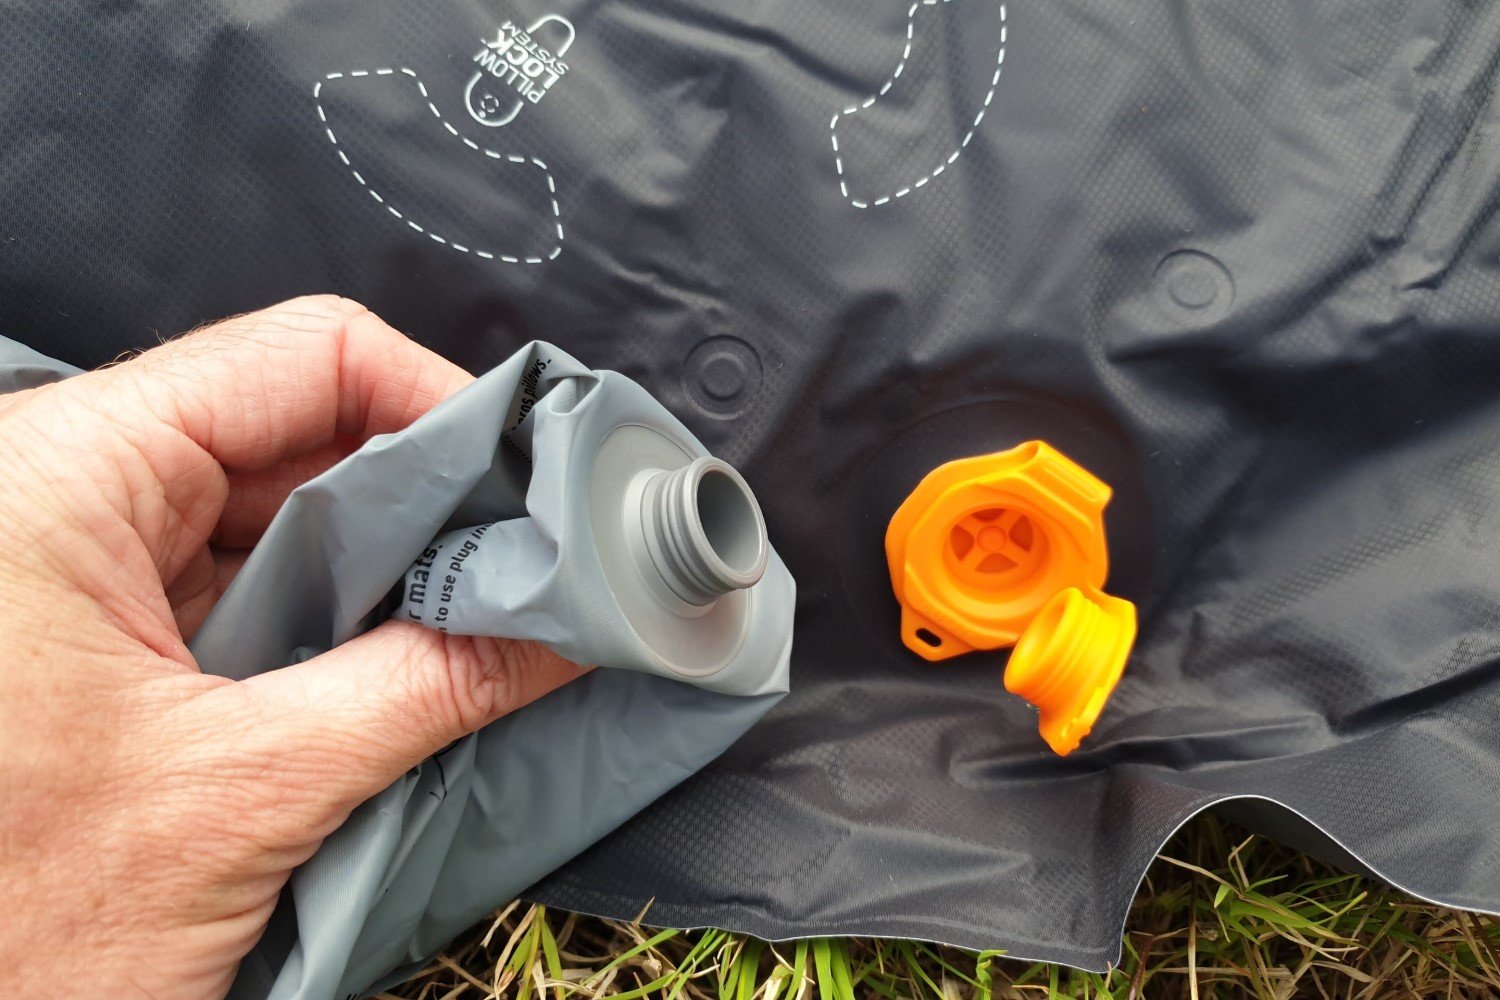  THE VALVE SYSTEM IS SUPER IMPRESSIVE AND EASY TO USE — IT HAS SEPARATE VALVES FOR INFLATE/DEFLATE (ALTHOUGH THEY ARE PART OF THE SAME PORT), WITH THE ONE-WAY INFLATION VALVE CONNECTING SECURELY WITH THE PROVIDED PUMP SACK. 